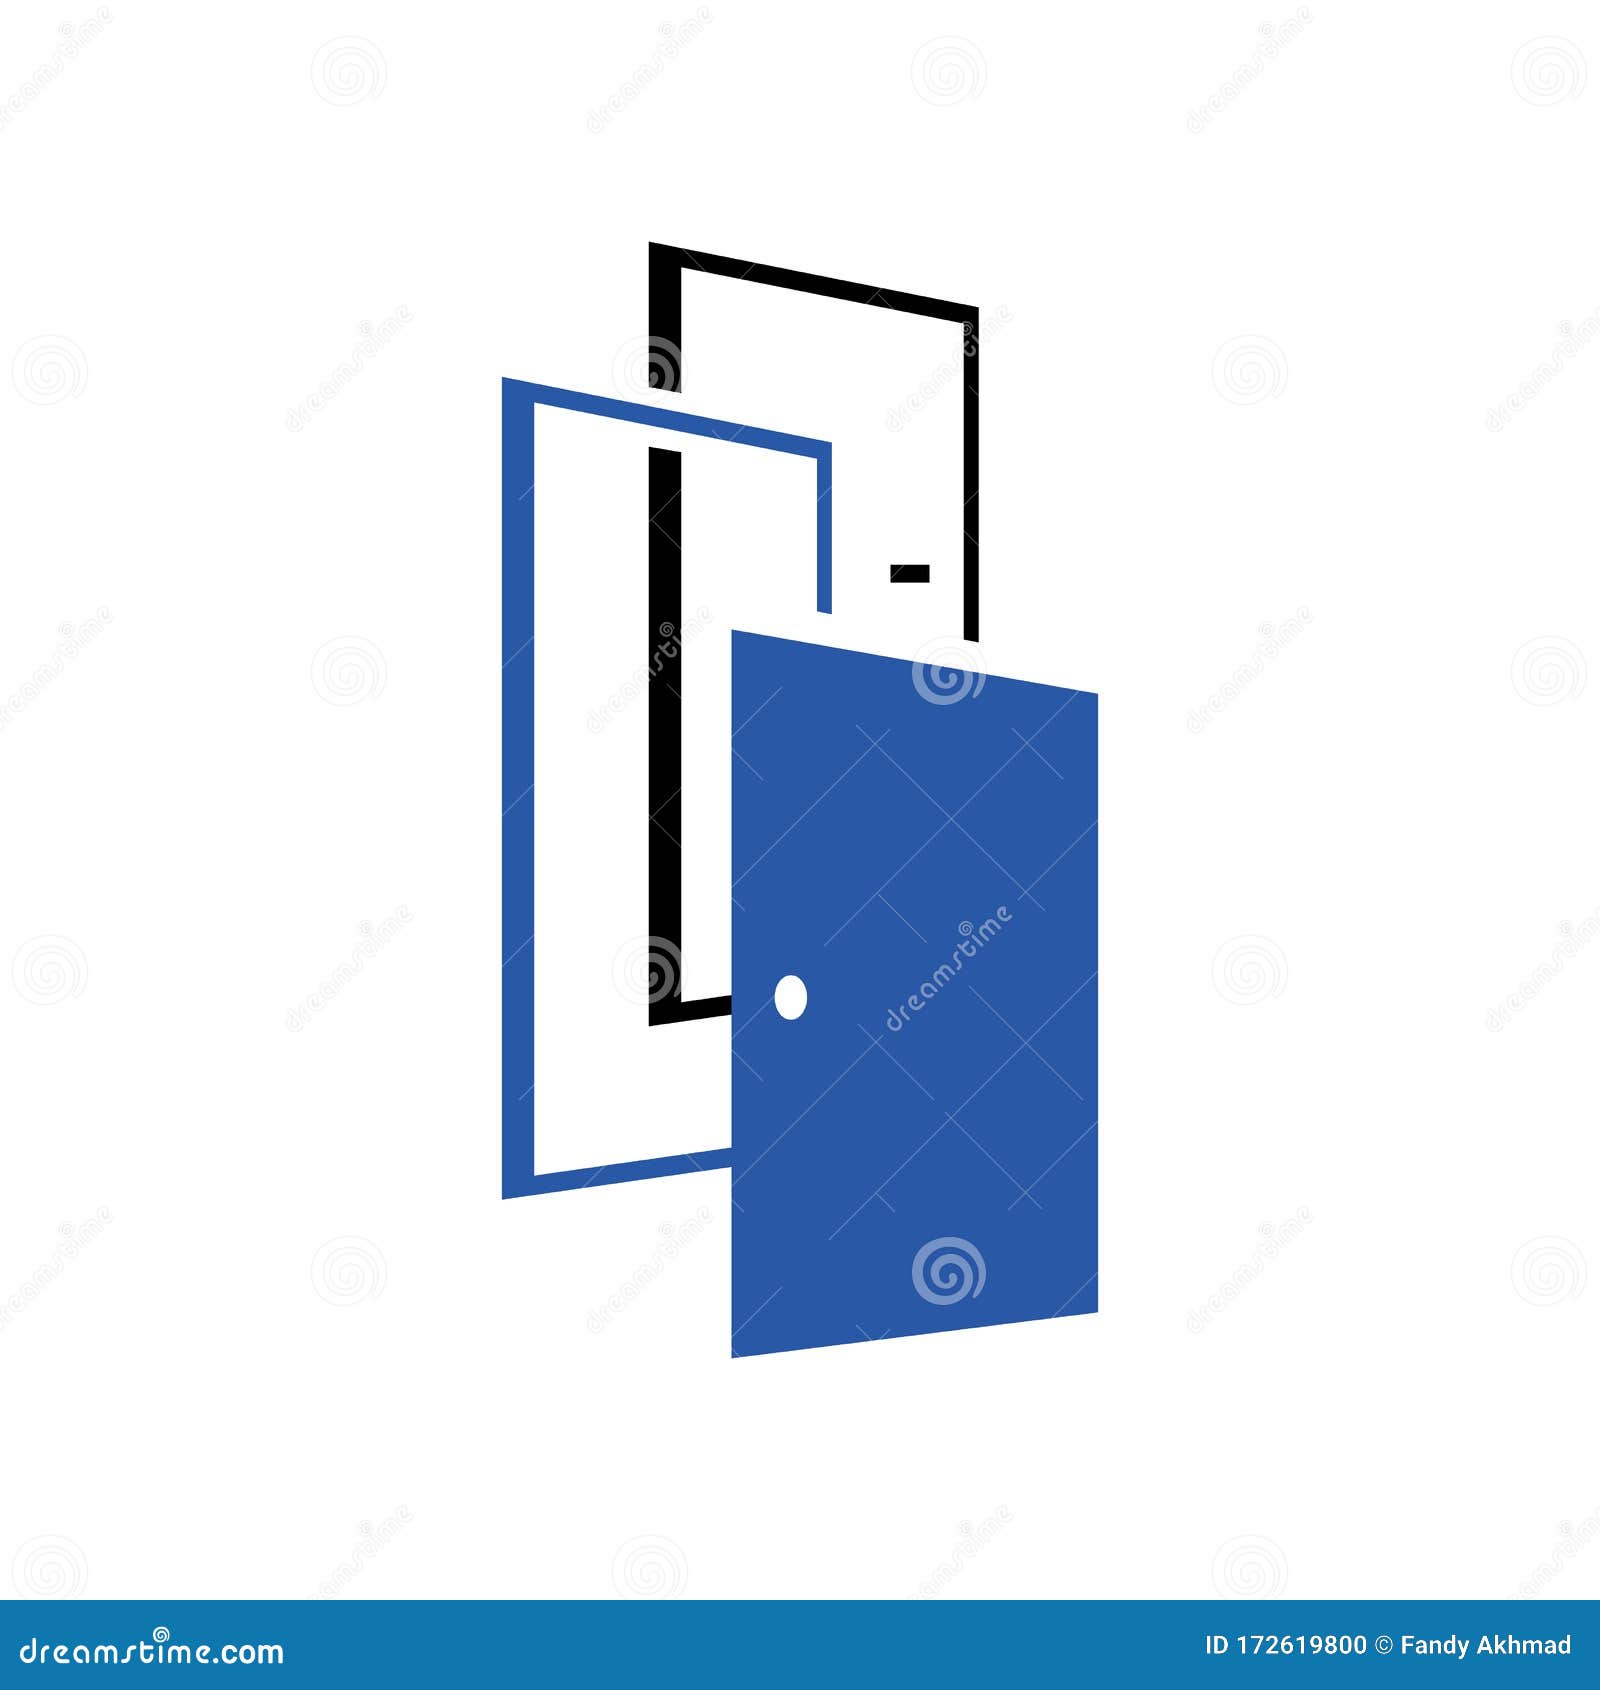 overlapping doors logo   an choices and oportunity concept